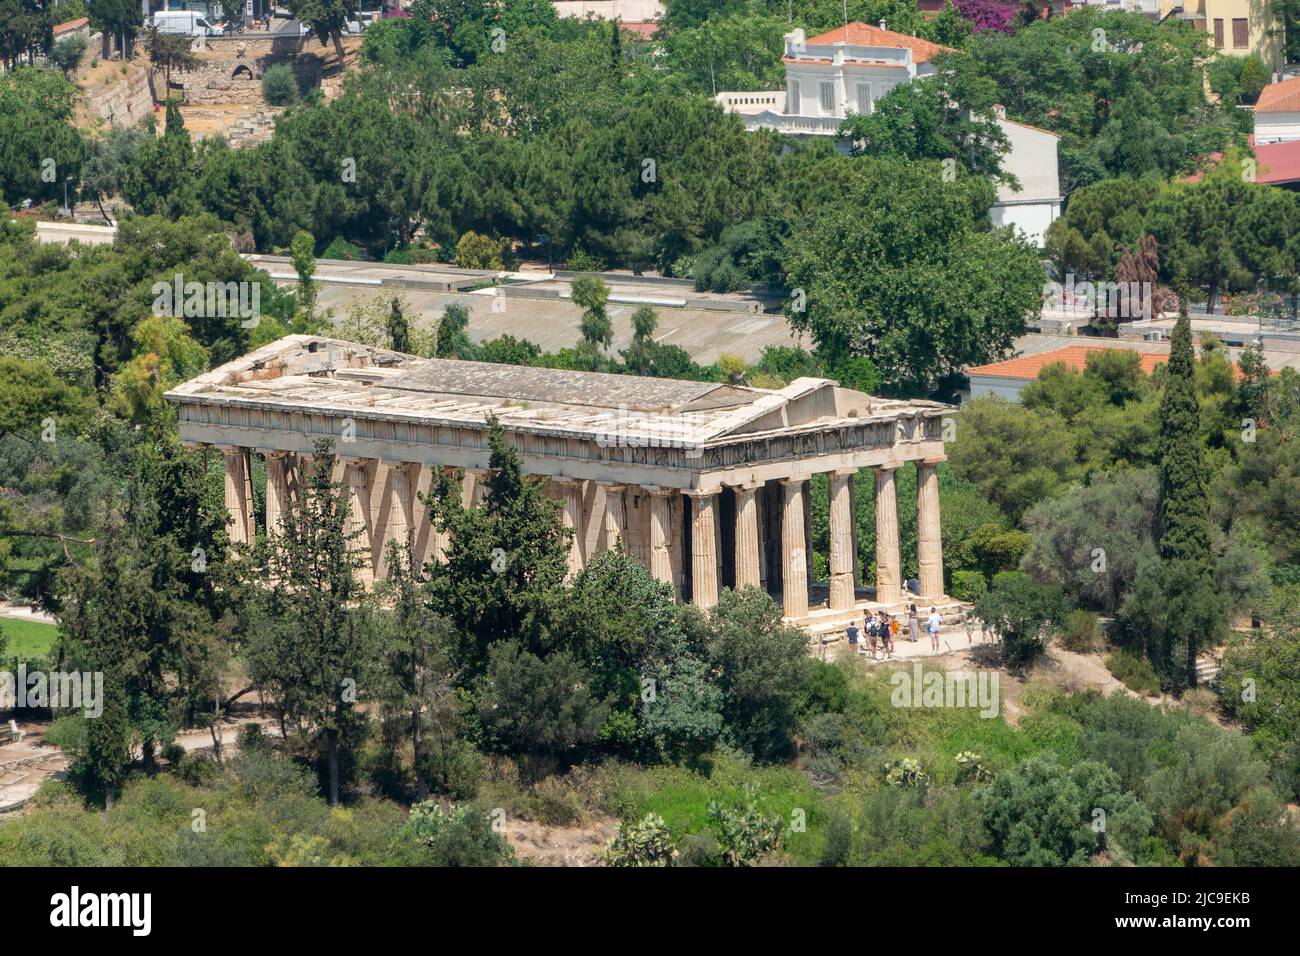 The Hephaisteion - Temple of Hephaestus at the Agora of Athens, Greece. Built circa 450 BCE. Viewed from the Acropolis. Stock Photo